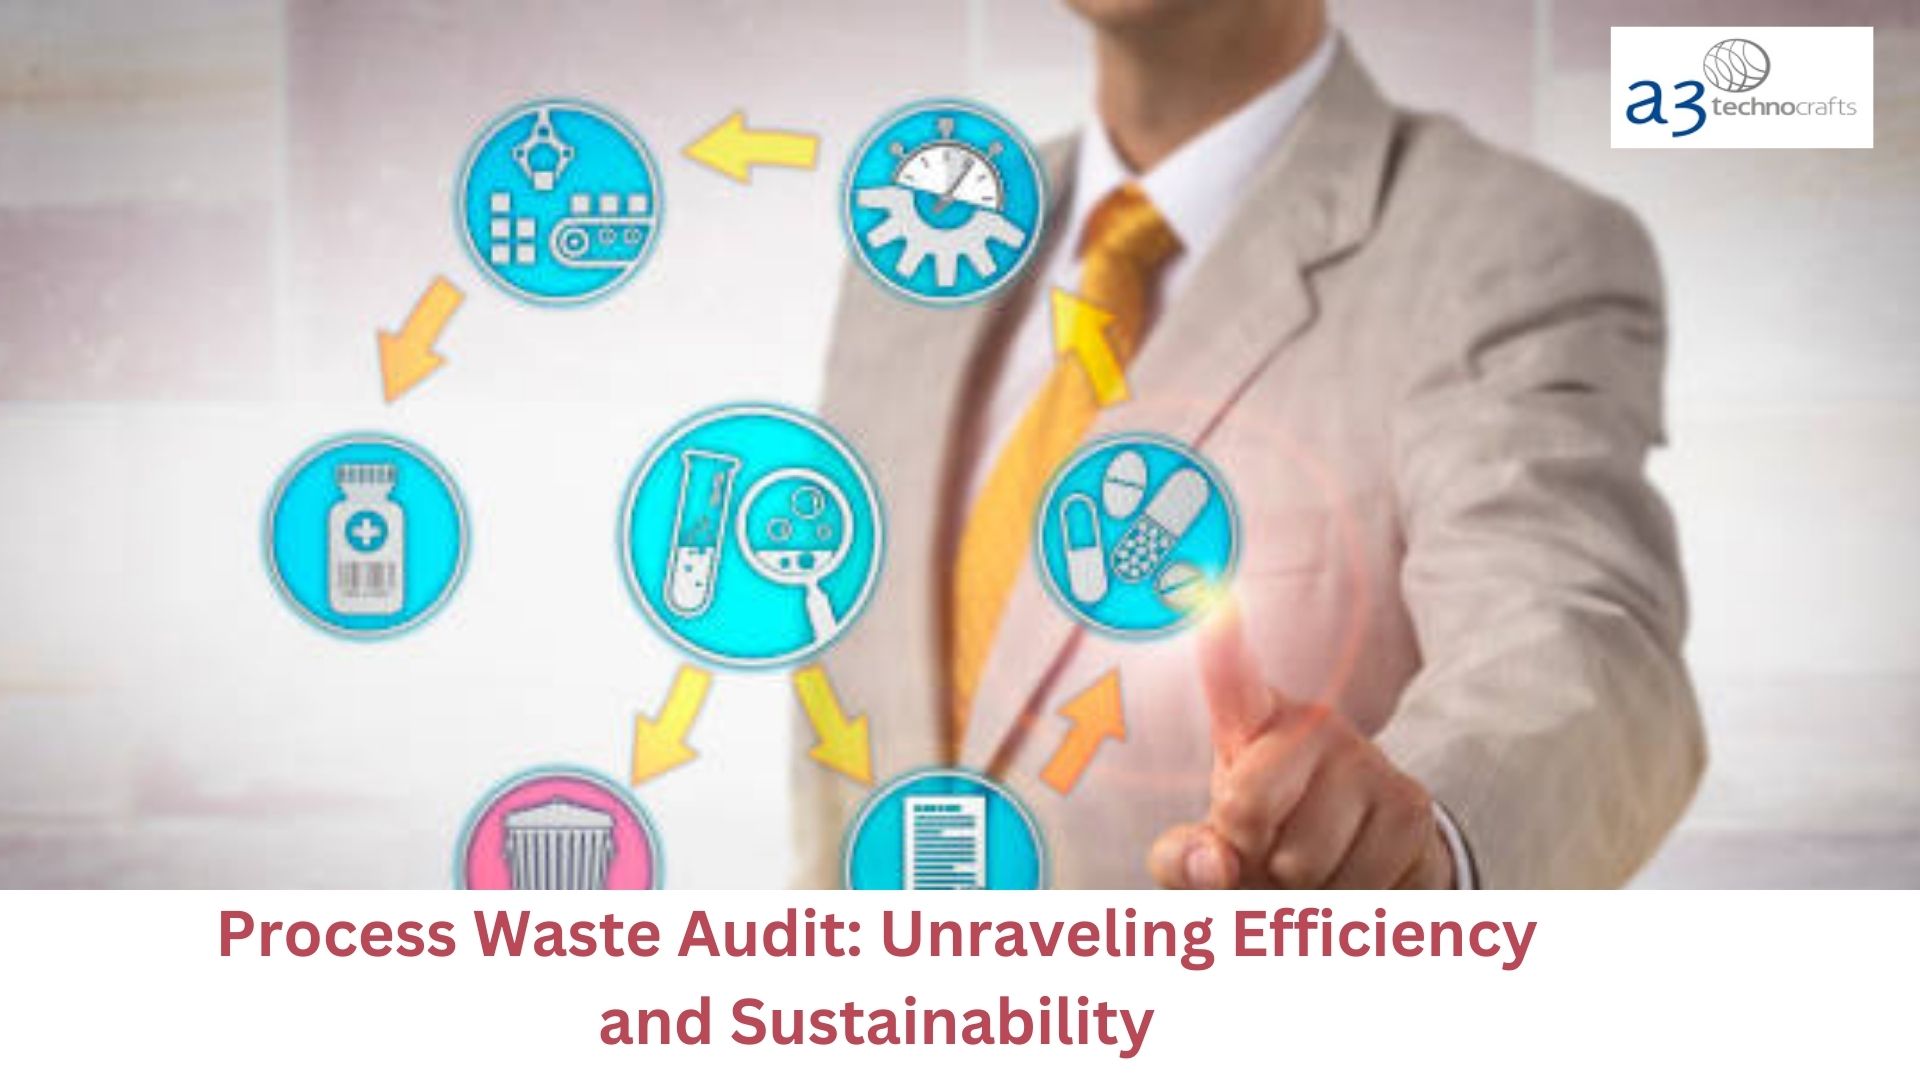 Process Waste Audit: Unraveling Efficiency and Sustainability